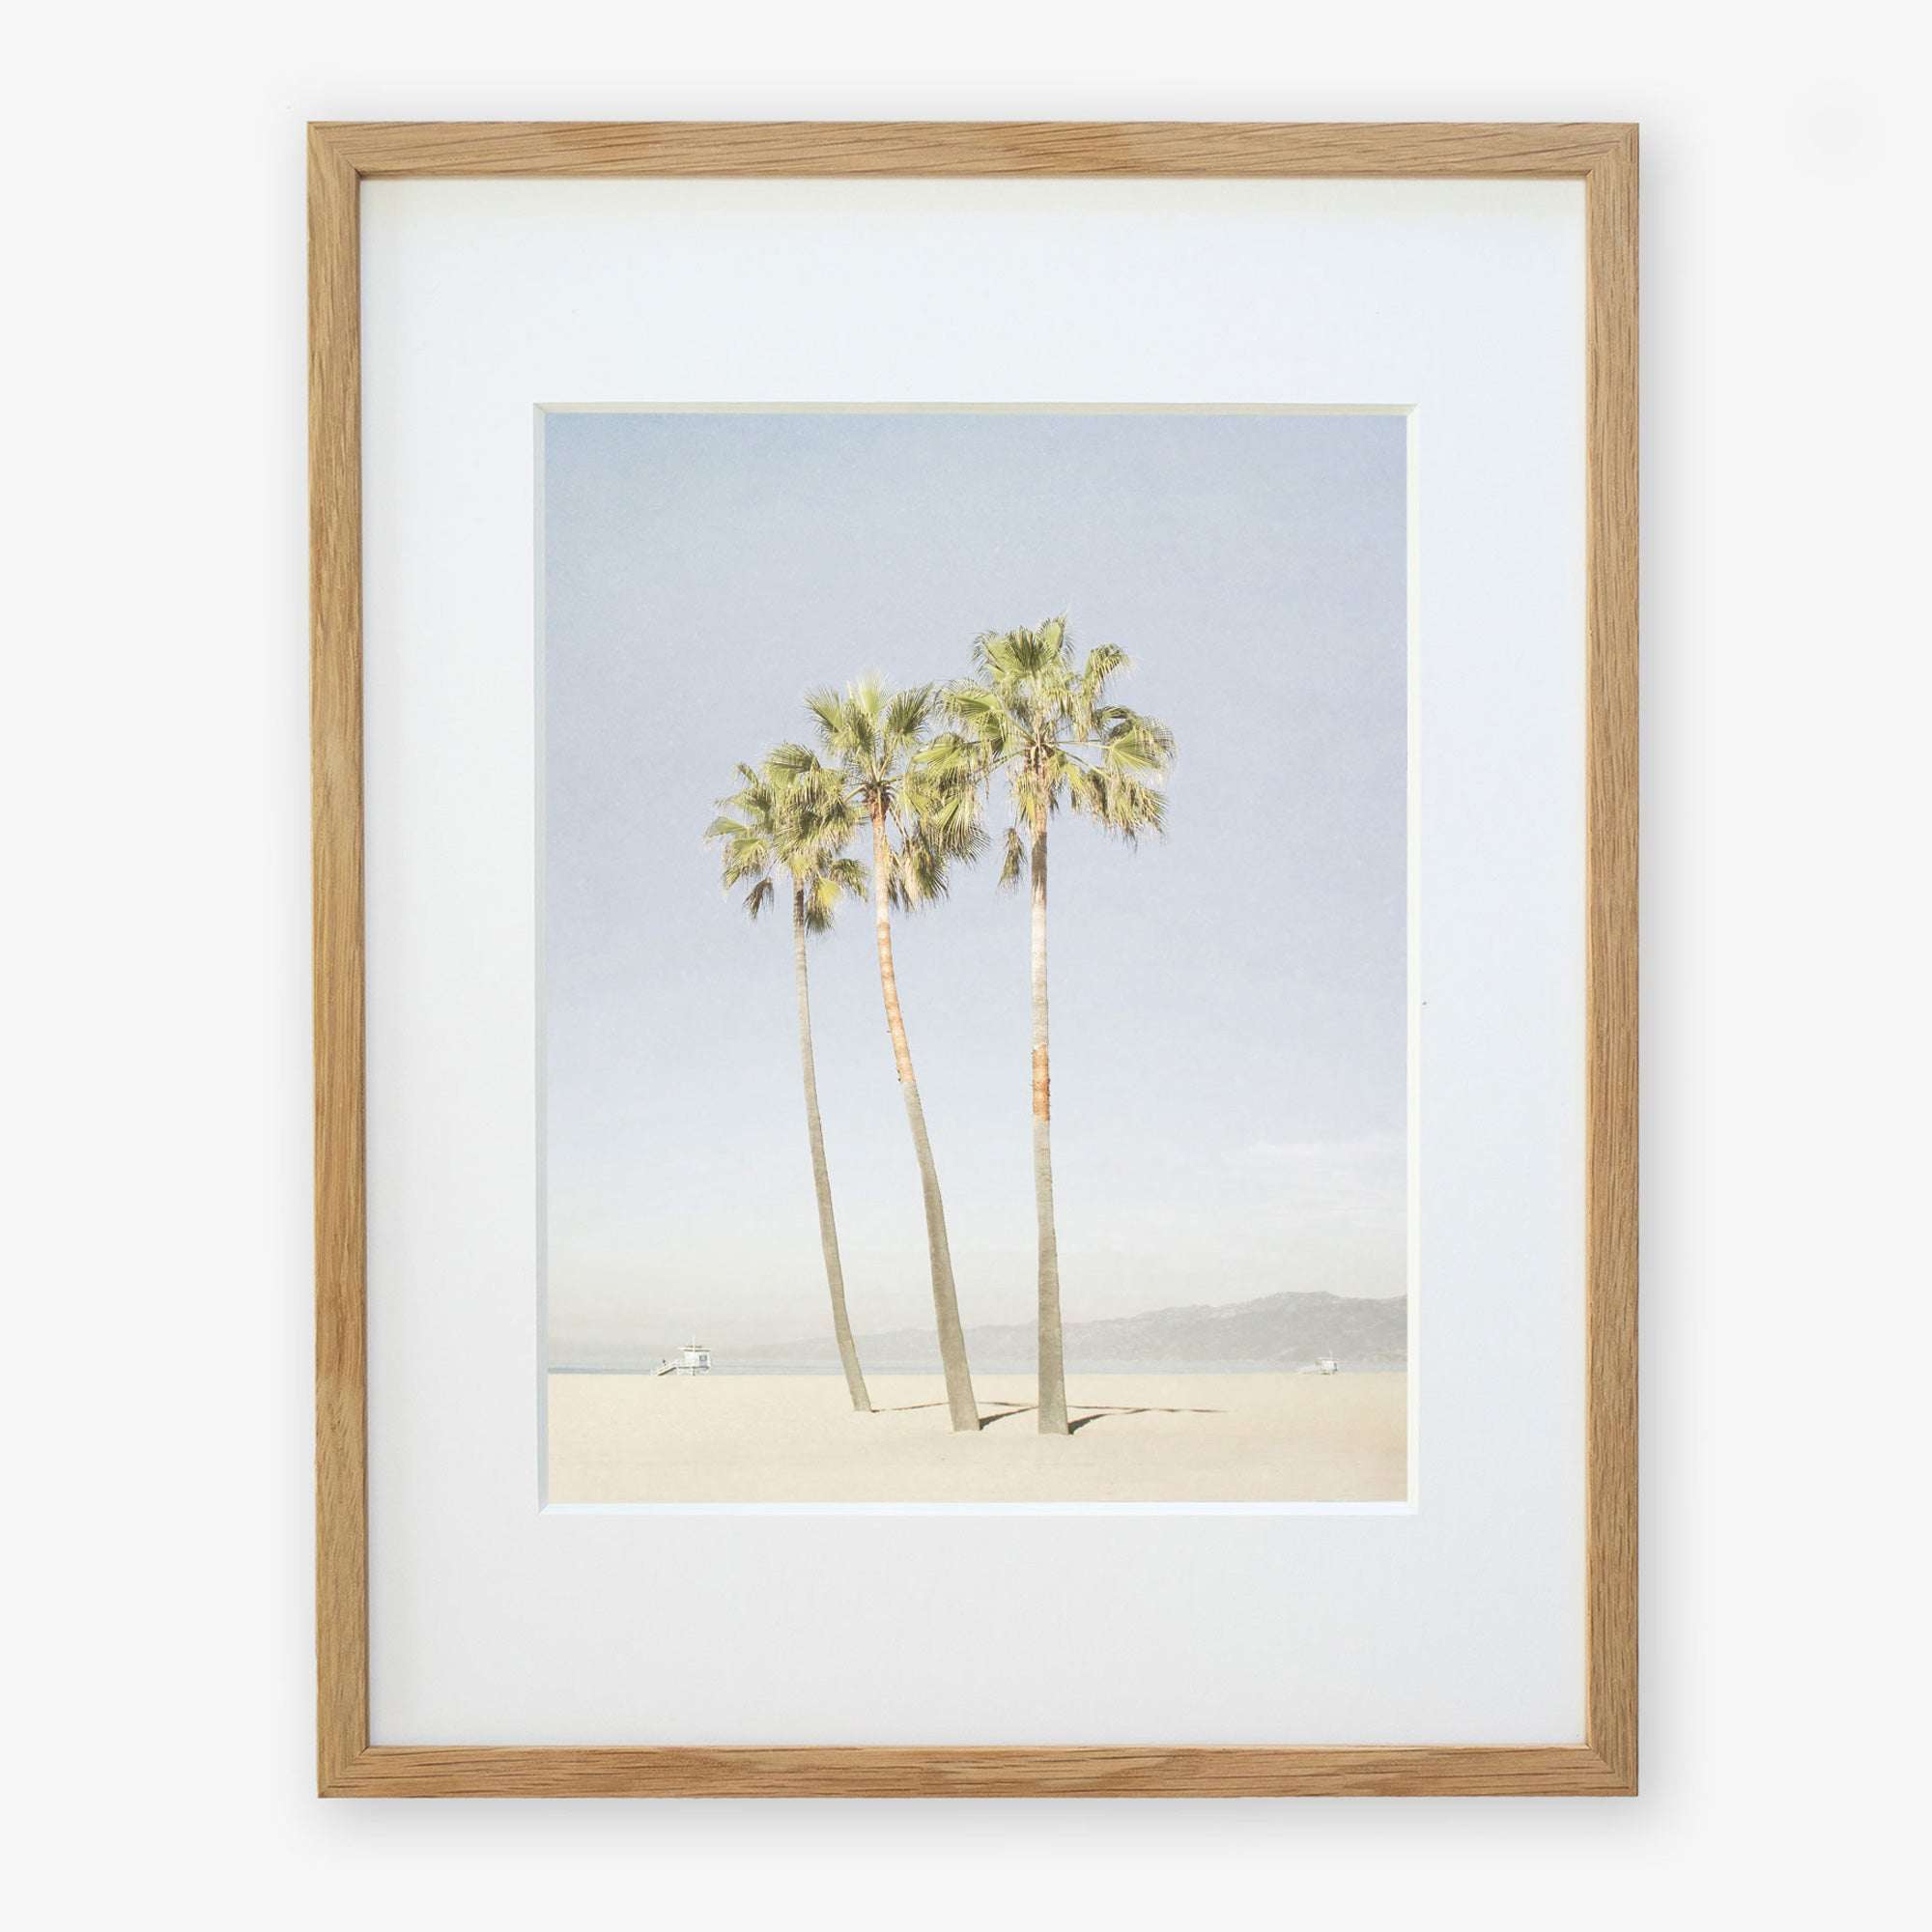 Framed artwork depicting three tall palm trees under a clear sky, with a small figure and a dog at the base, possibly on Venice Beach. The frame is simple and made of light wood. This is the Offley Green California Venice Beach Print, 'Three Palms'.